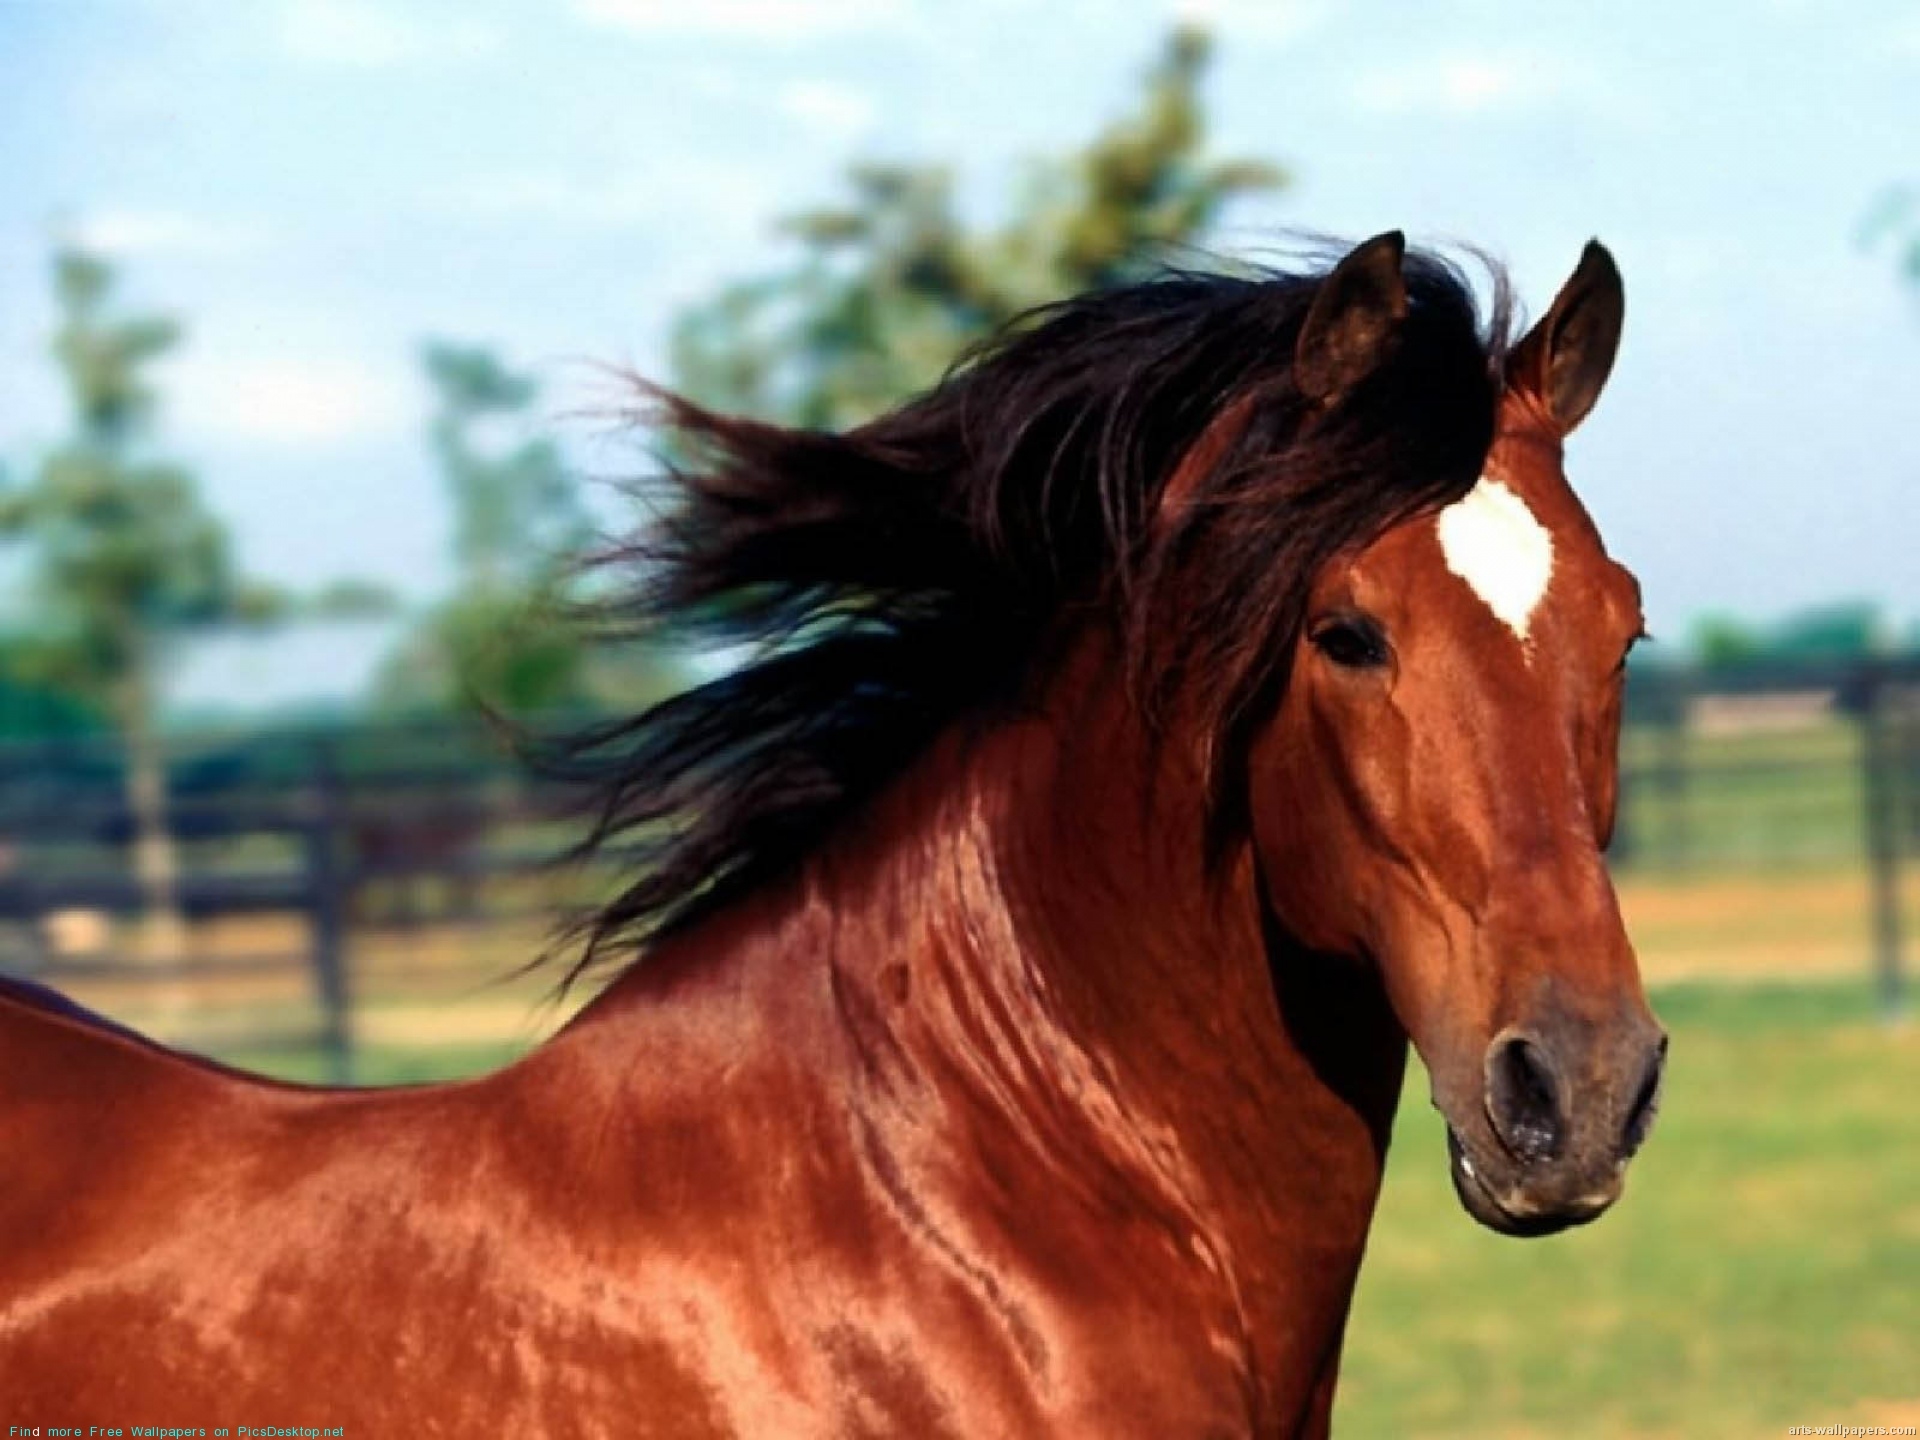 Humans and Horses Share Facial Expressions - Gazette Review